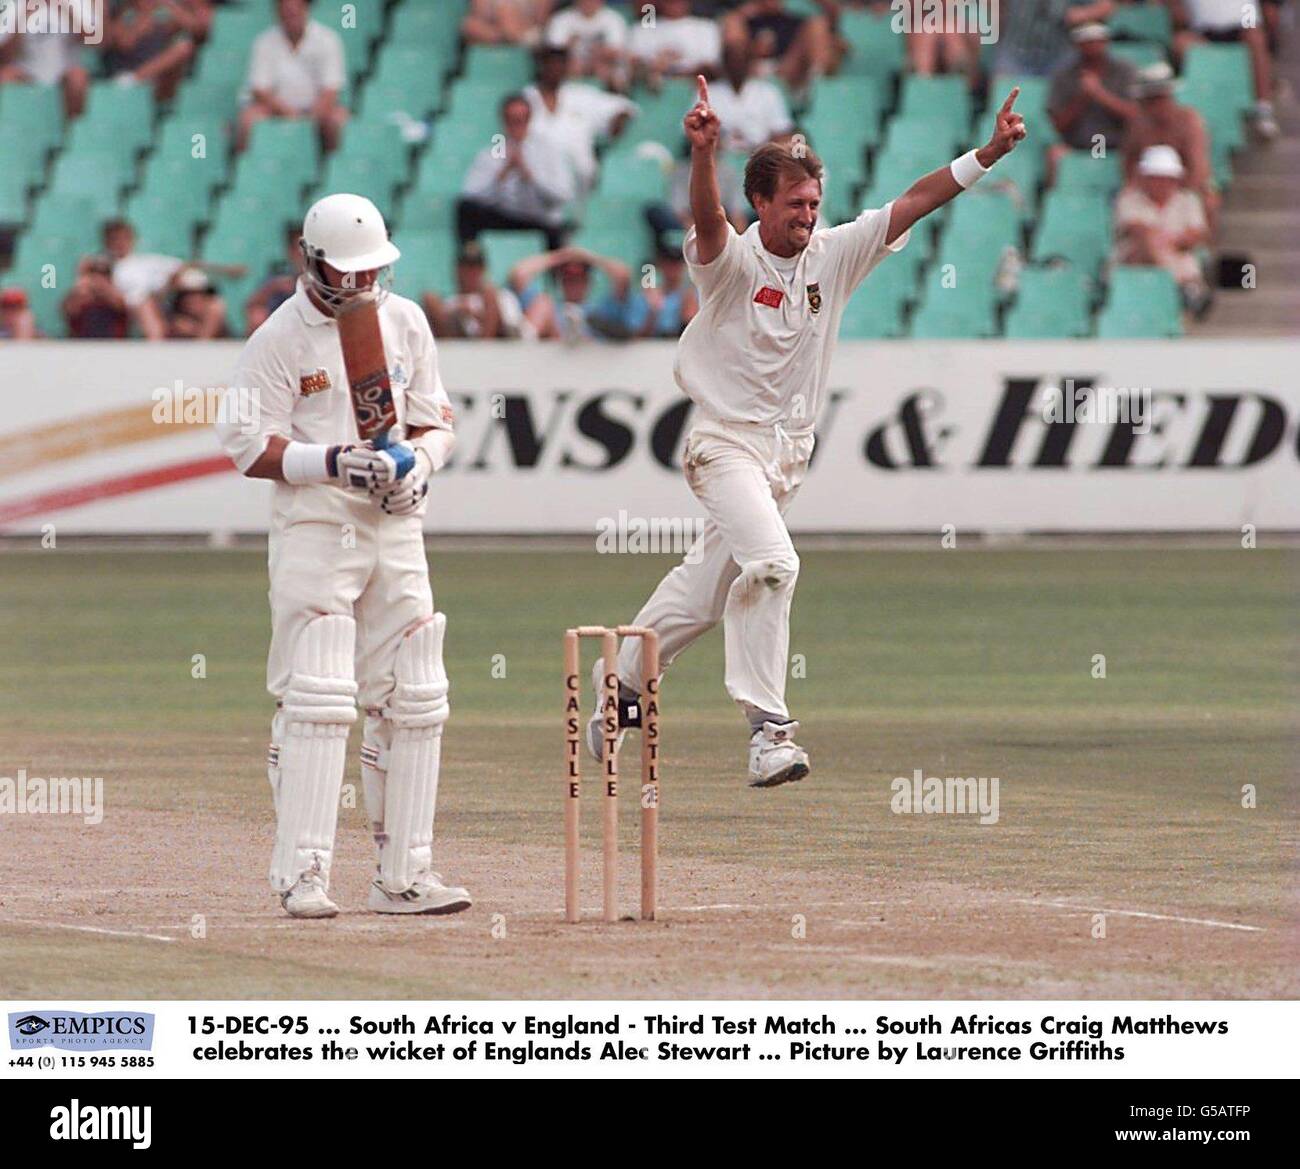 15-DEC-95, South Africa v England - Third Test Match, South Africas Craig Matthews celebrates the wicket of Englands Alec Stewart, Picture by Laurence Griffiths Stock Photo